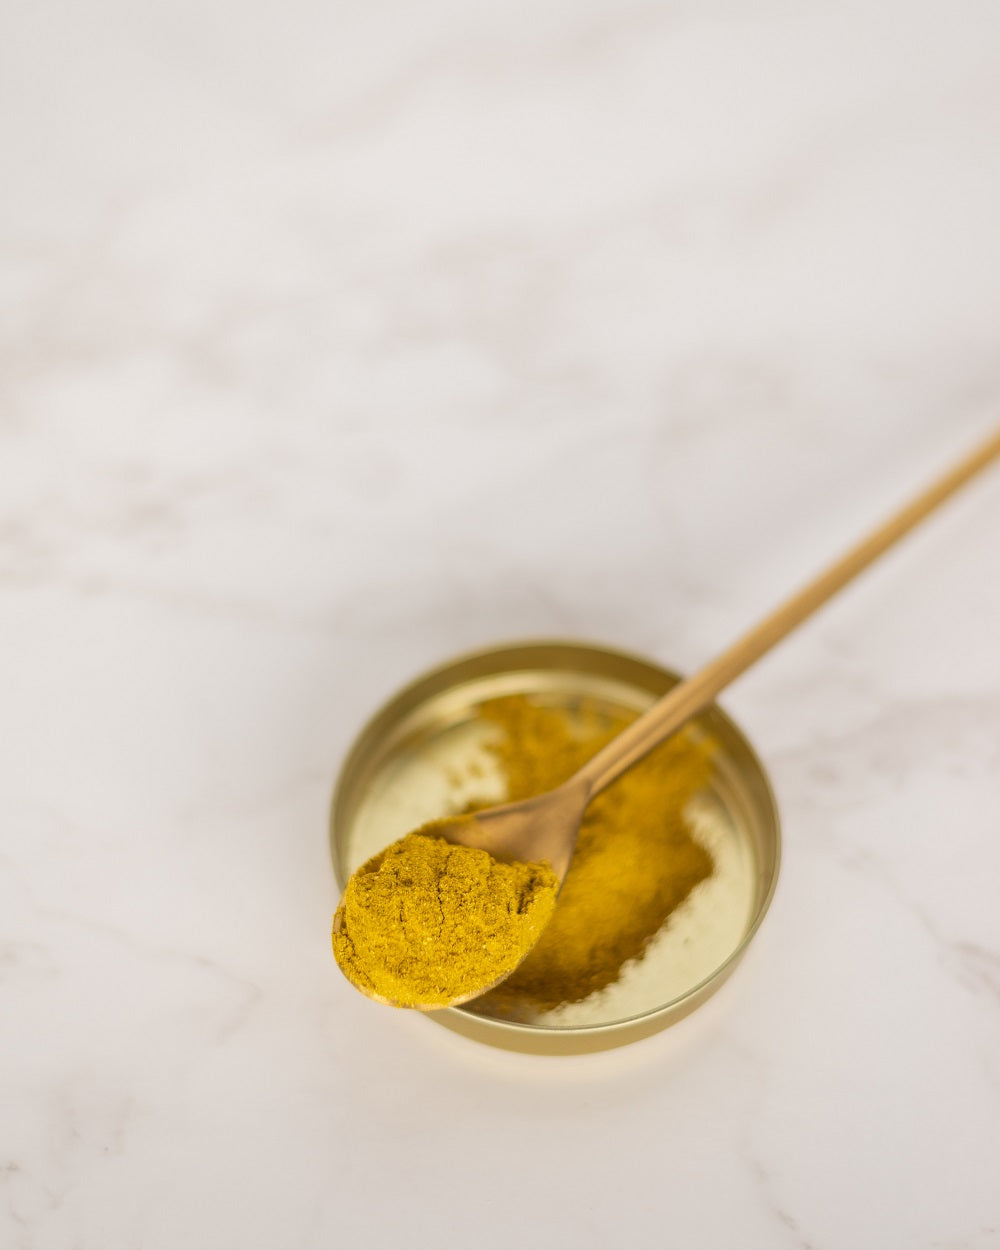 How to Optimize the Bioavailability of Turmeric